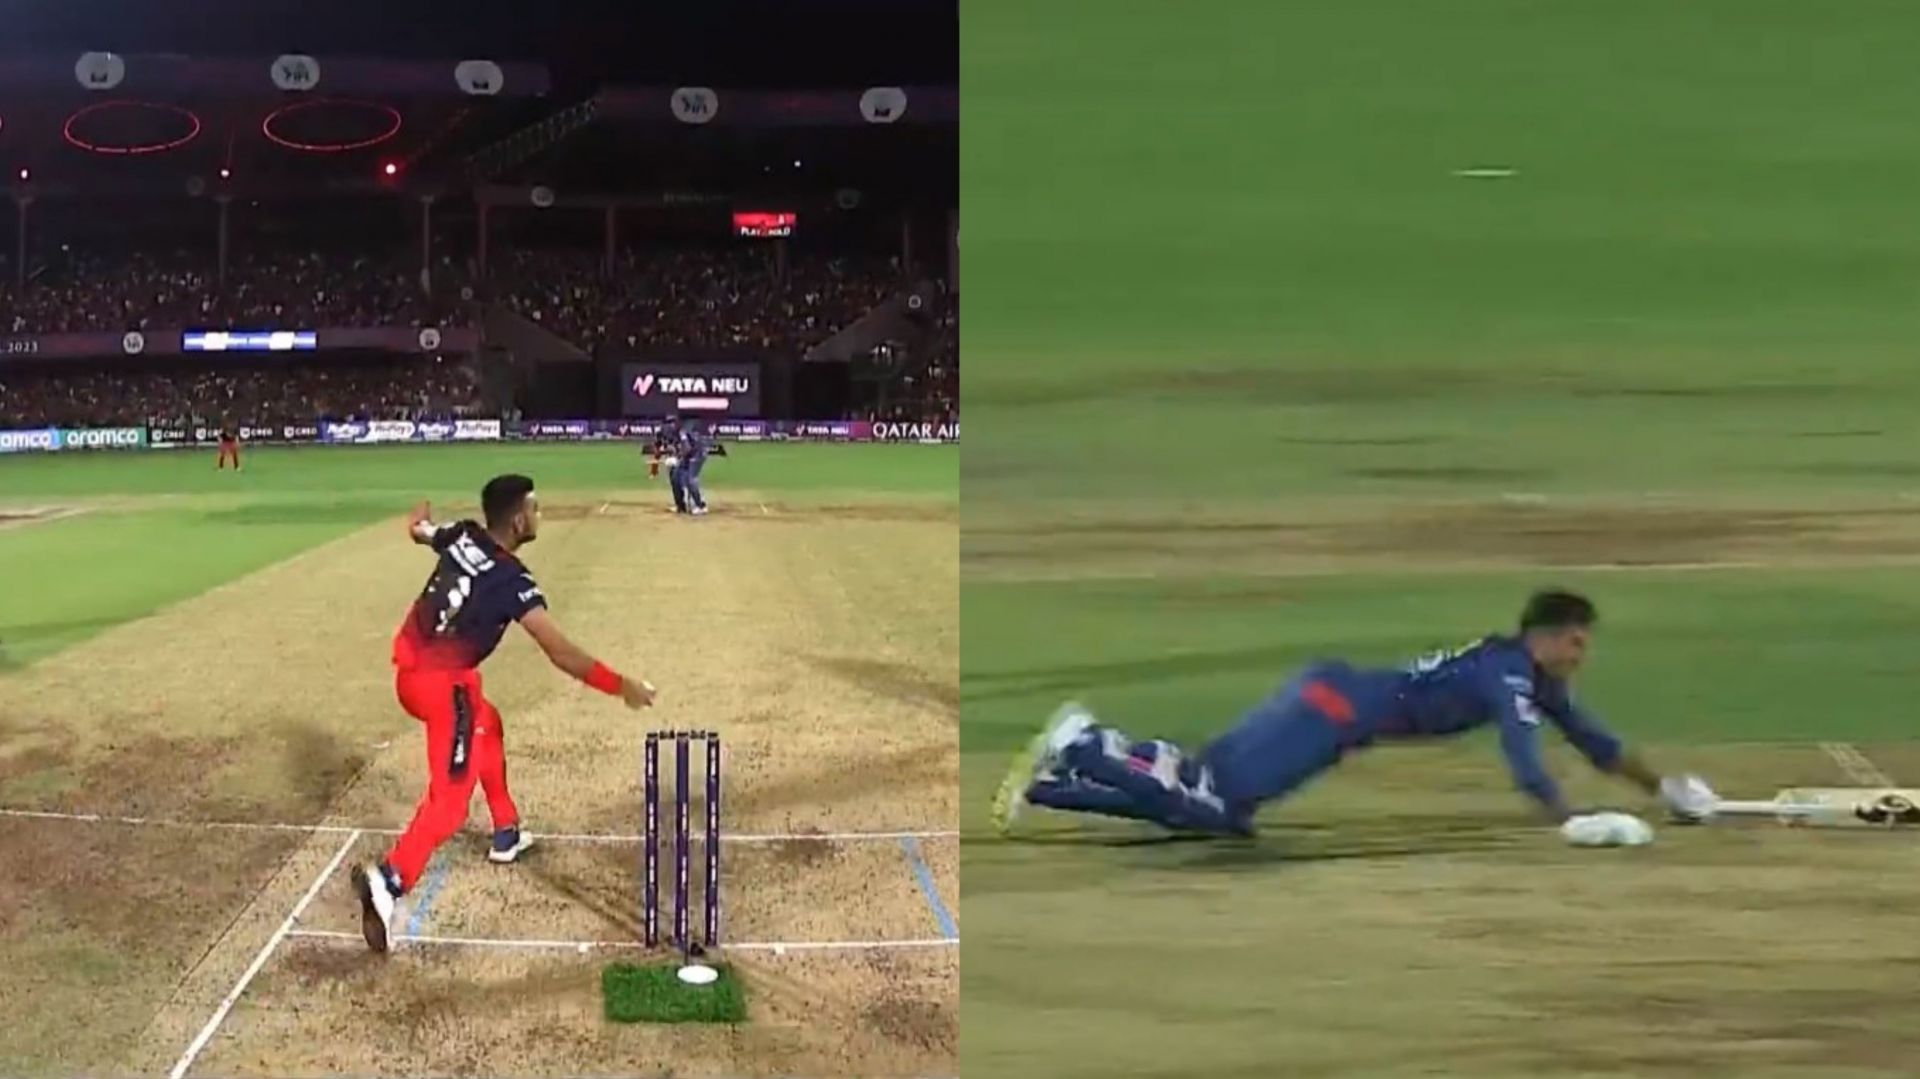 Harshal Patel failed to execute a run-out at the non-striker